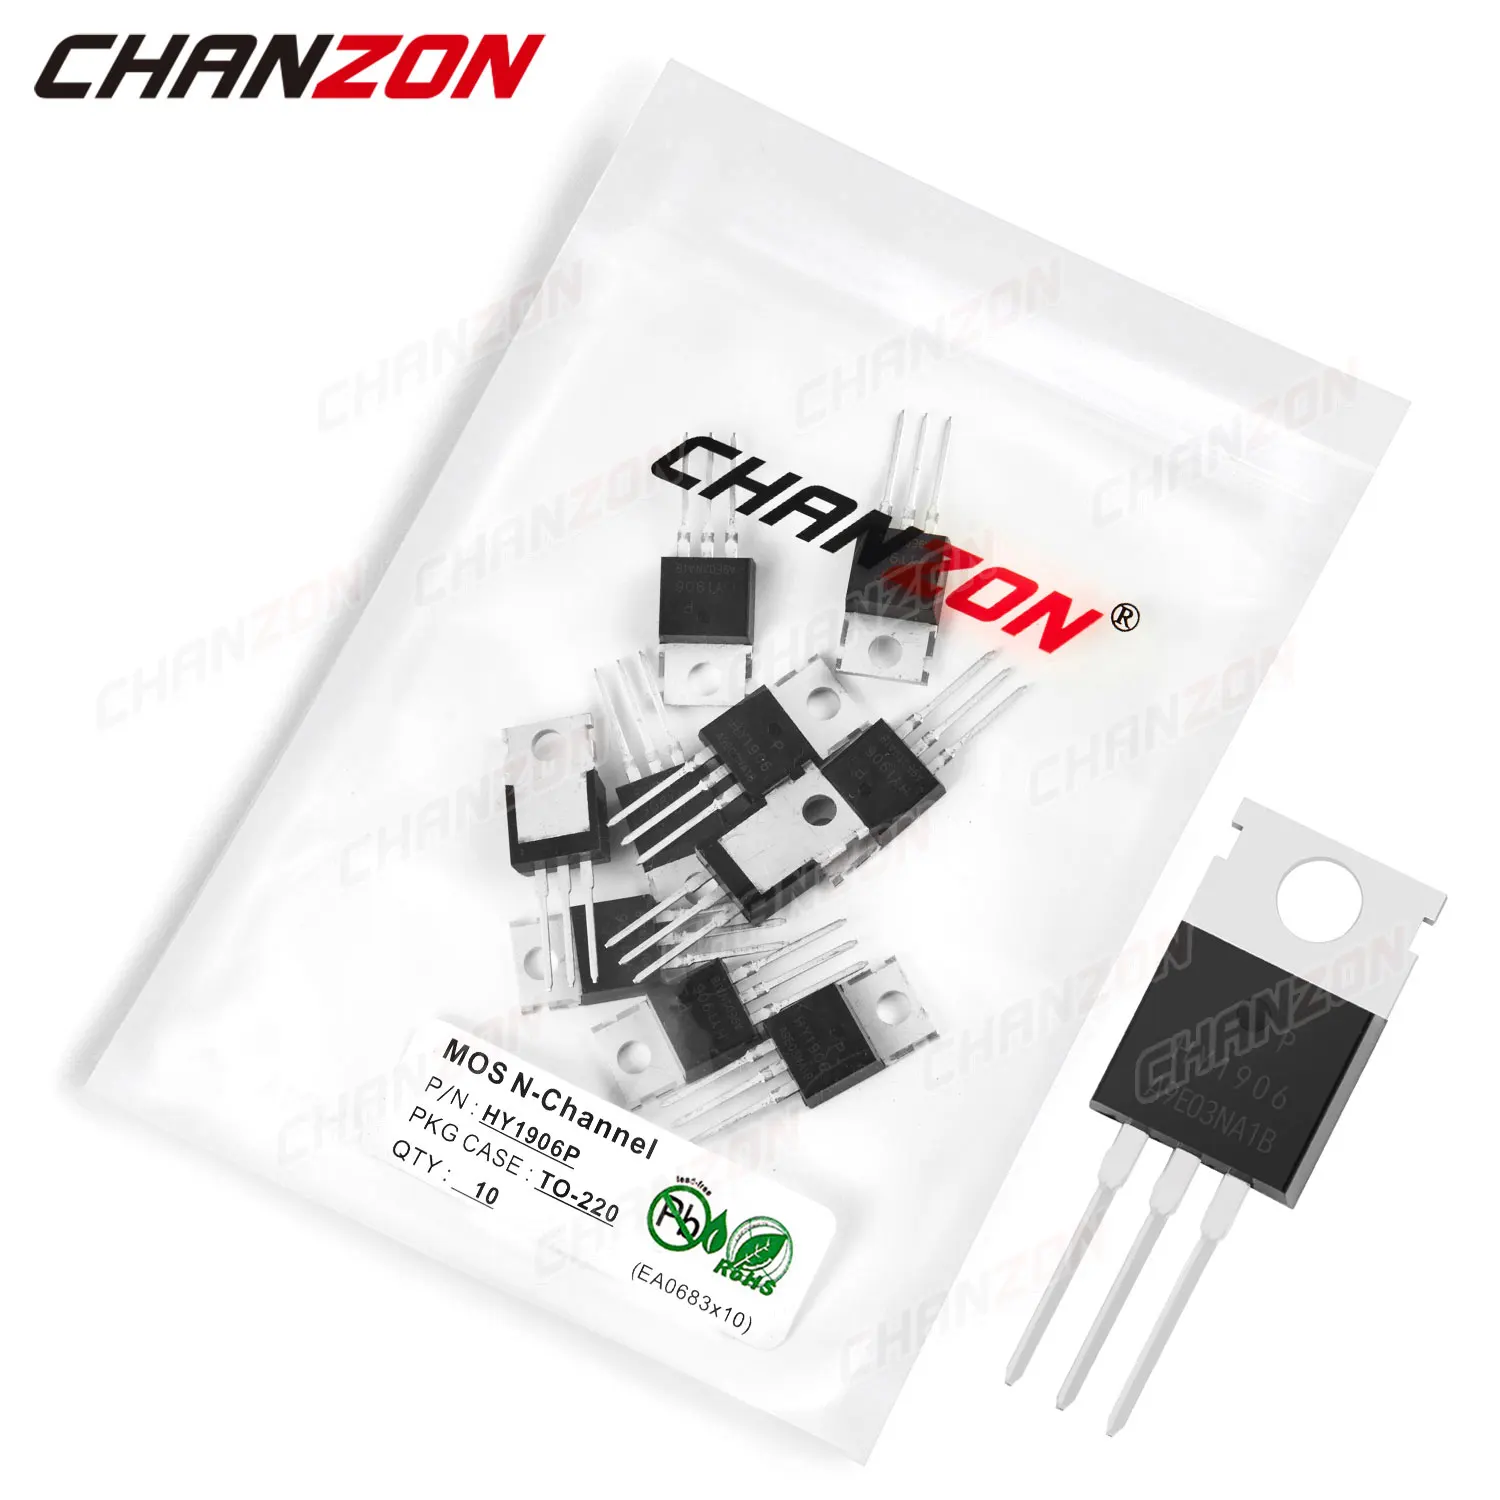 

10pcs HY1906P TO-220 N-Channel Mosfet Bipolar Junction Transistor BJT SIC Mos Fets Triode Tube 120A 60V Integrated Circuits